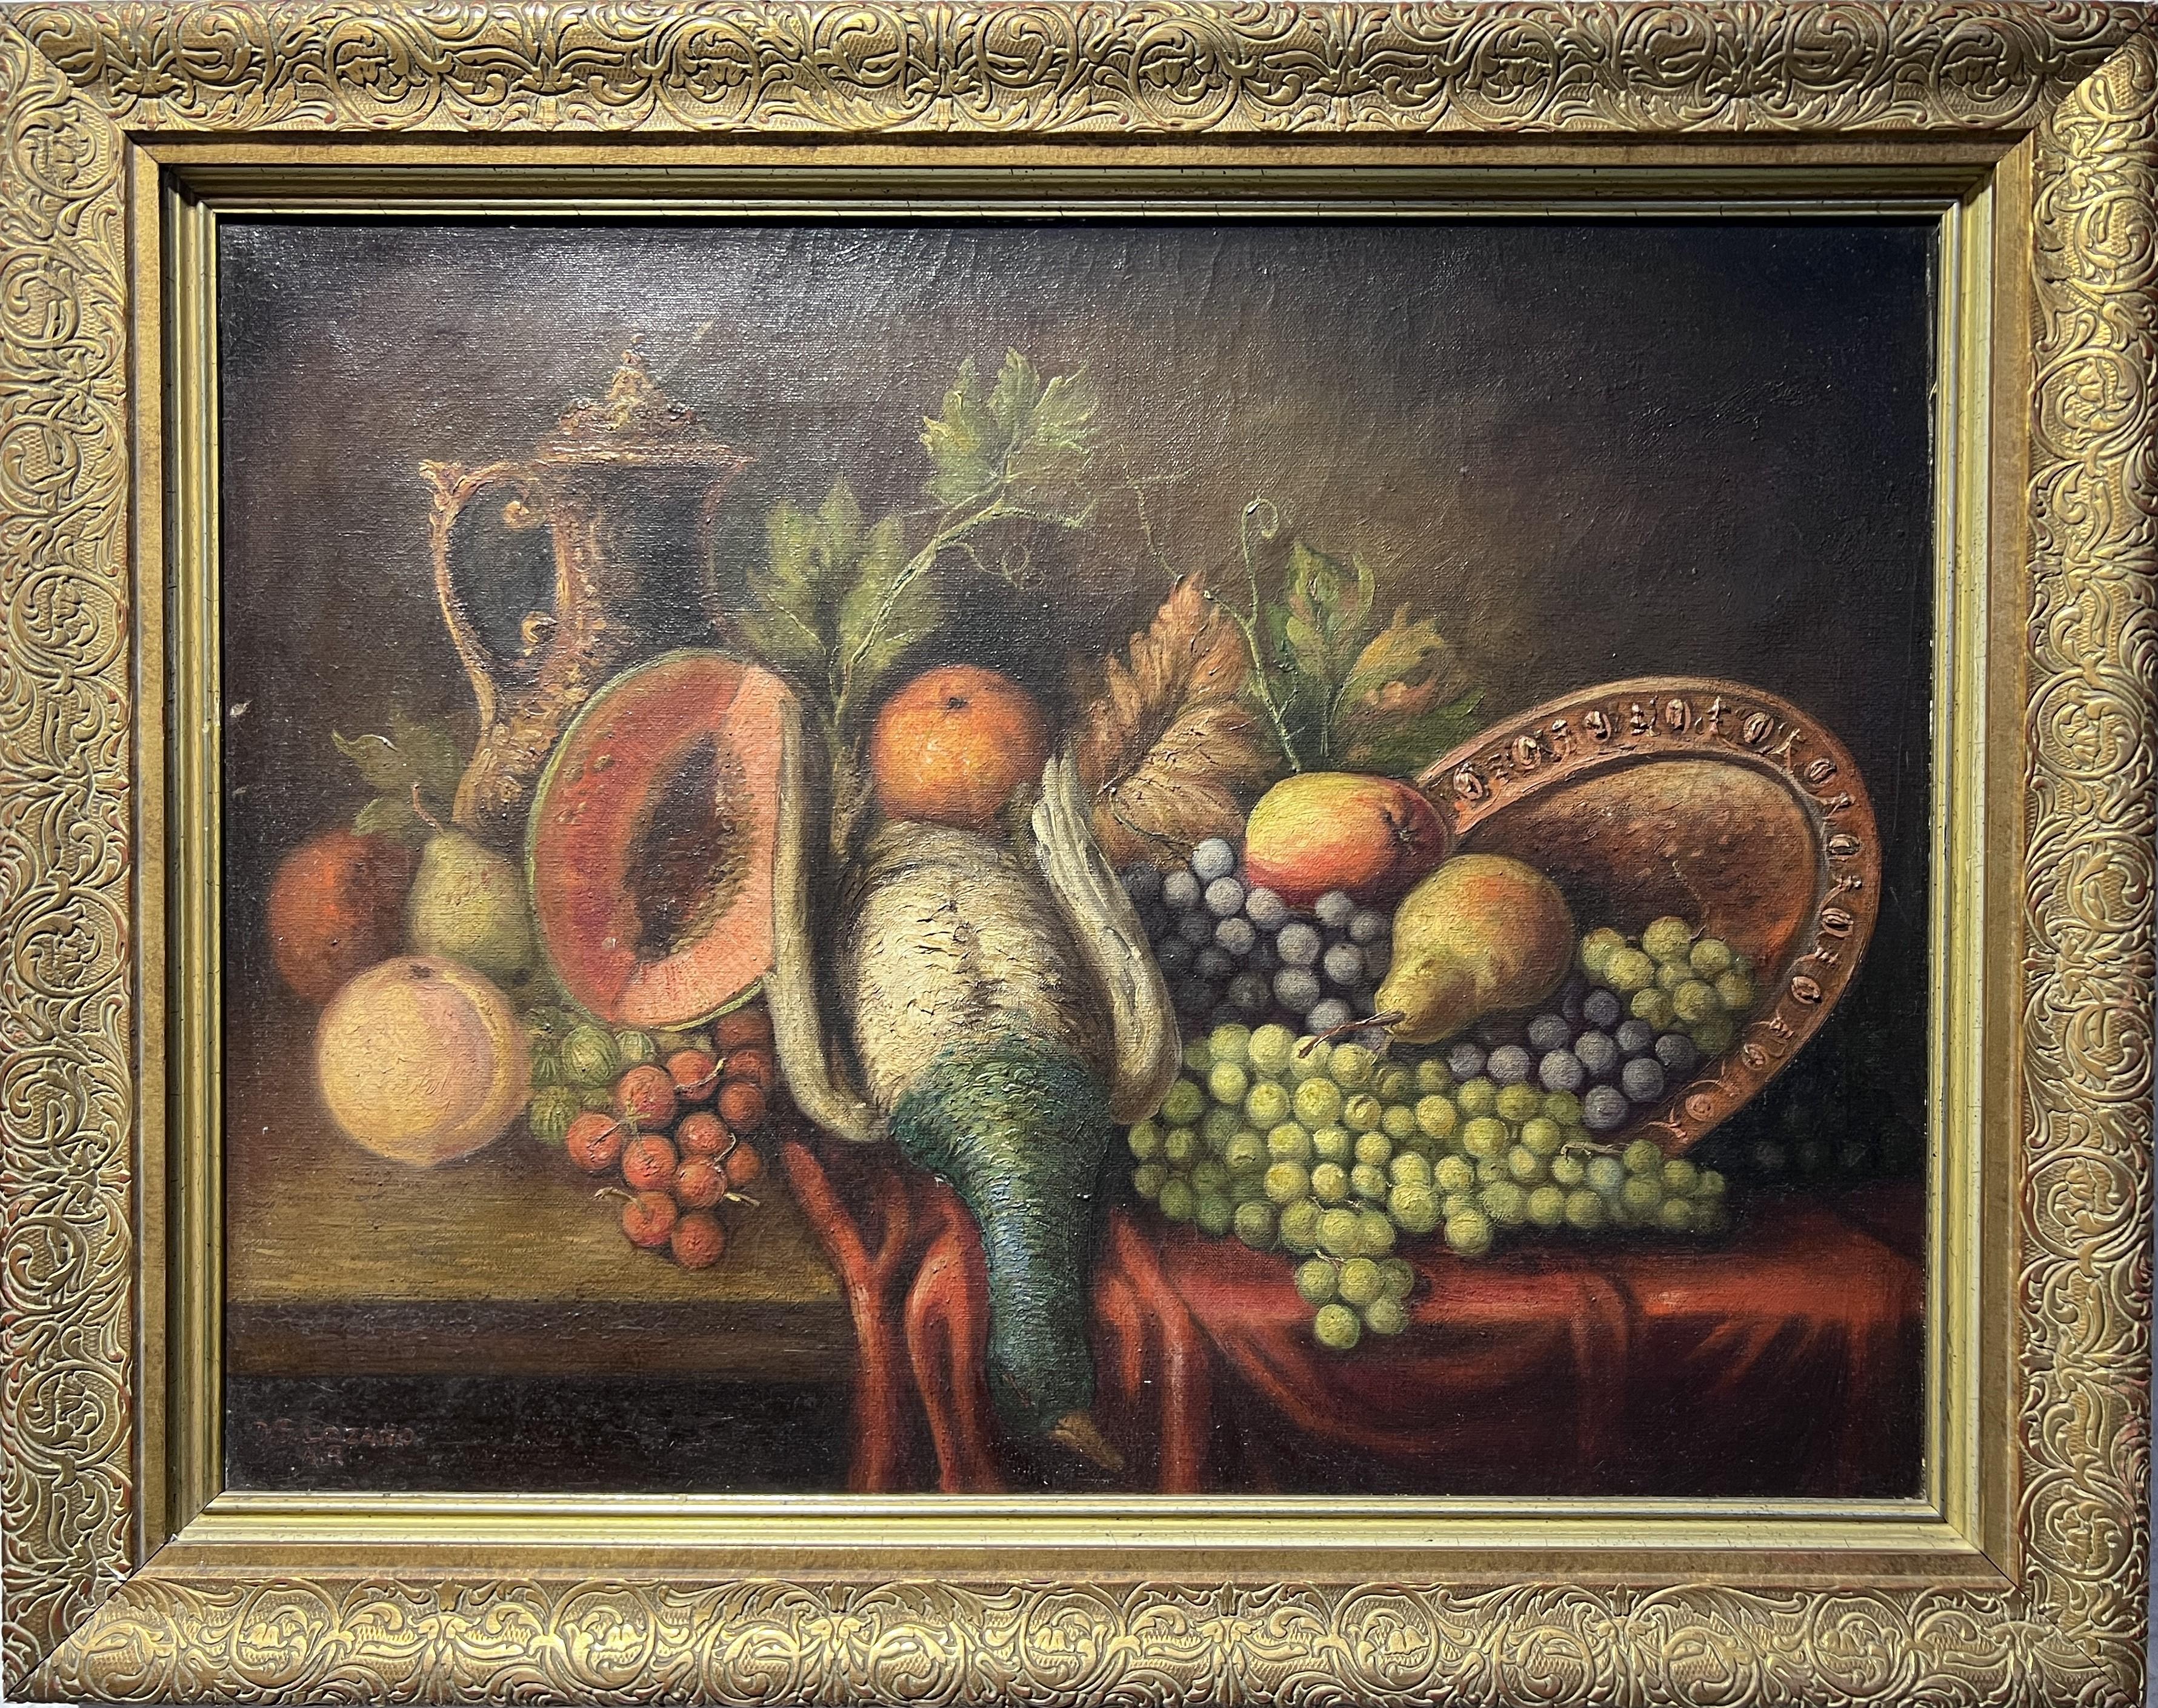 D.S.Lozano Landscape Painting - D.S. Lozano Vintage Oil Painting on canvas, Still Life of Died duck and fruits